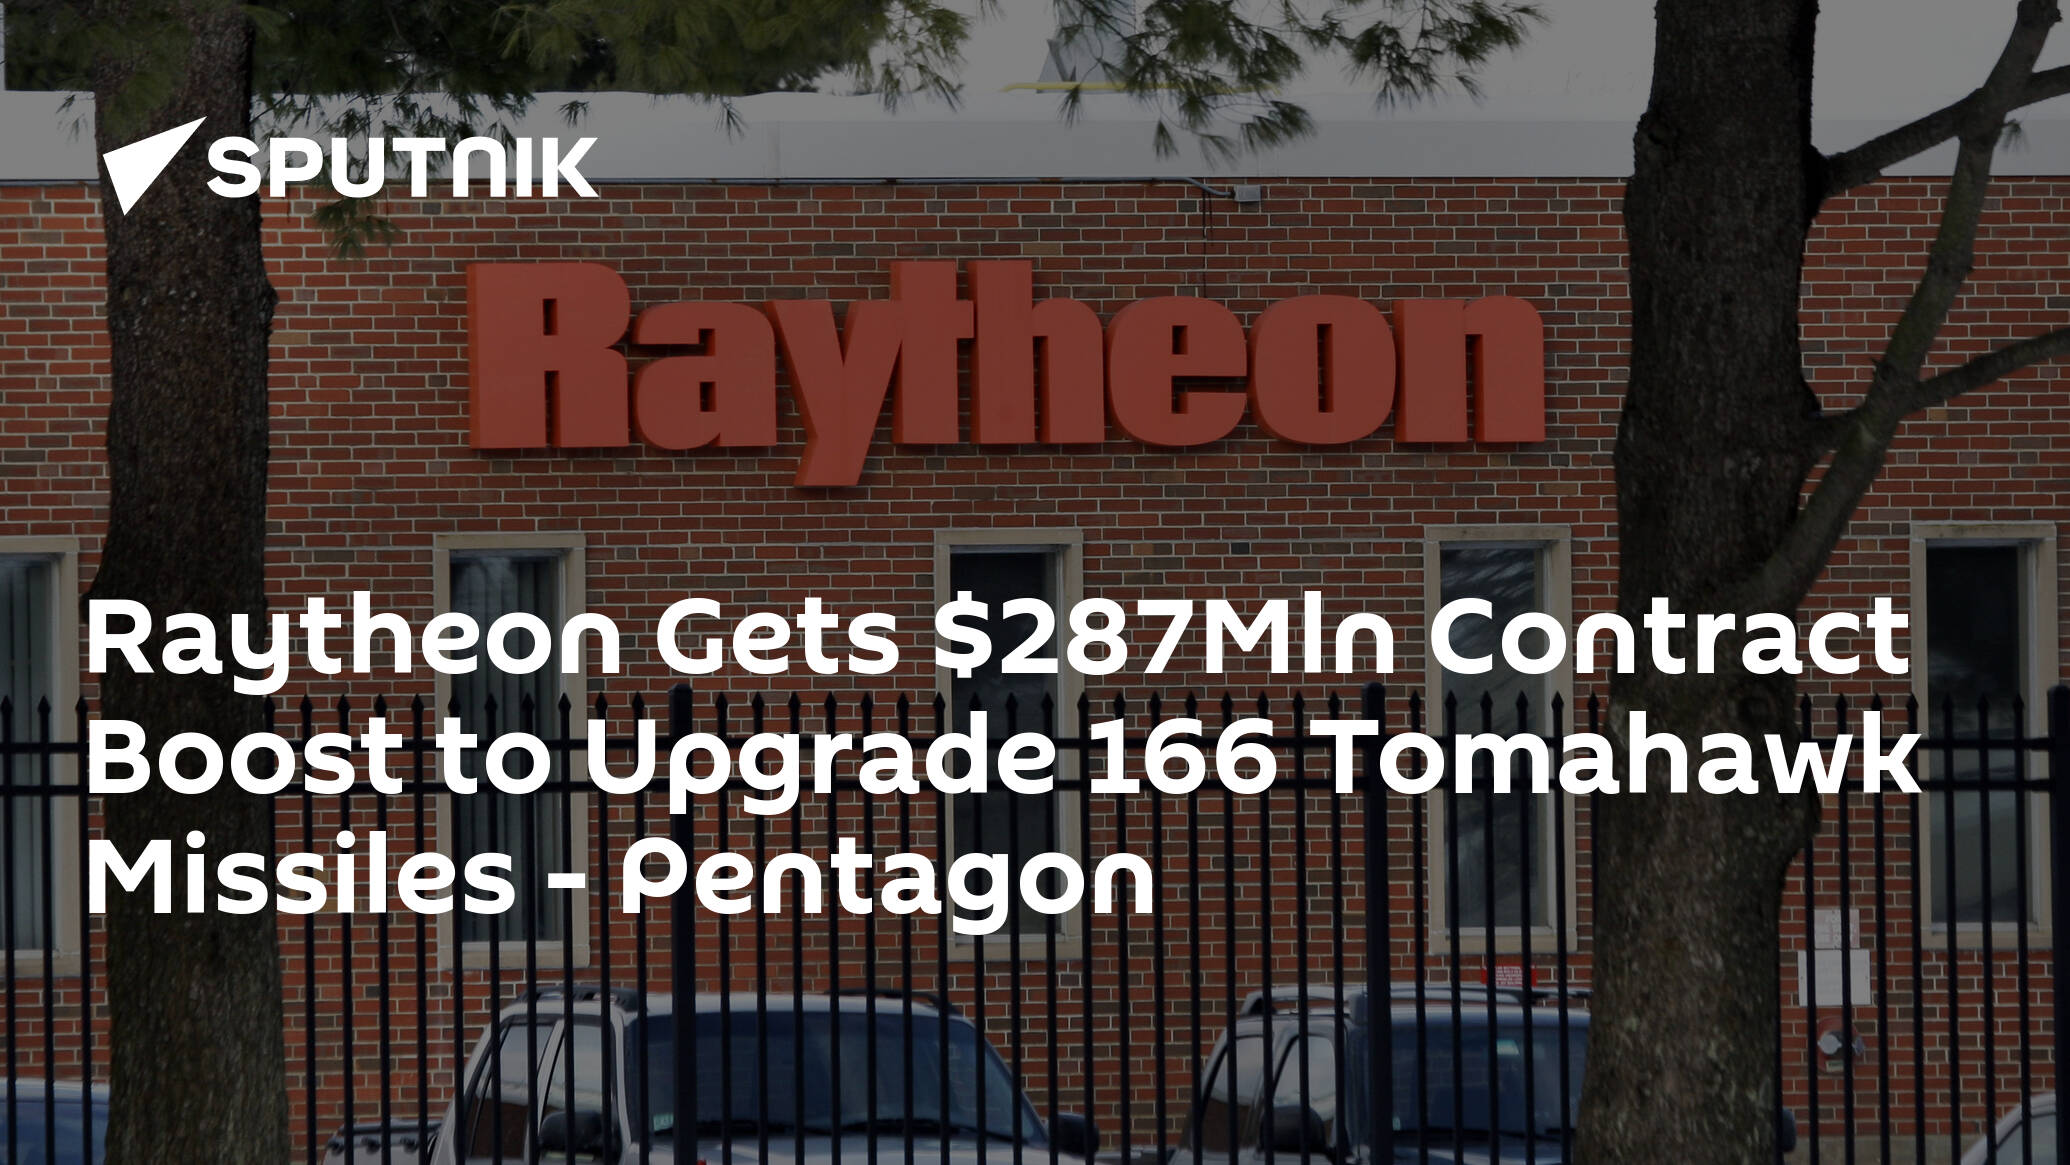 Raytheon Gets 7Mln Contract Boost to Upgrade 166 Tomahawk Missiles – Pentagon